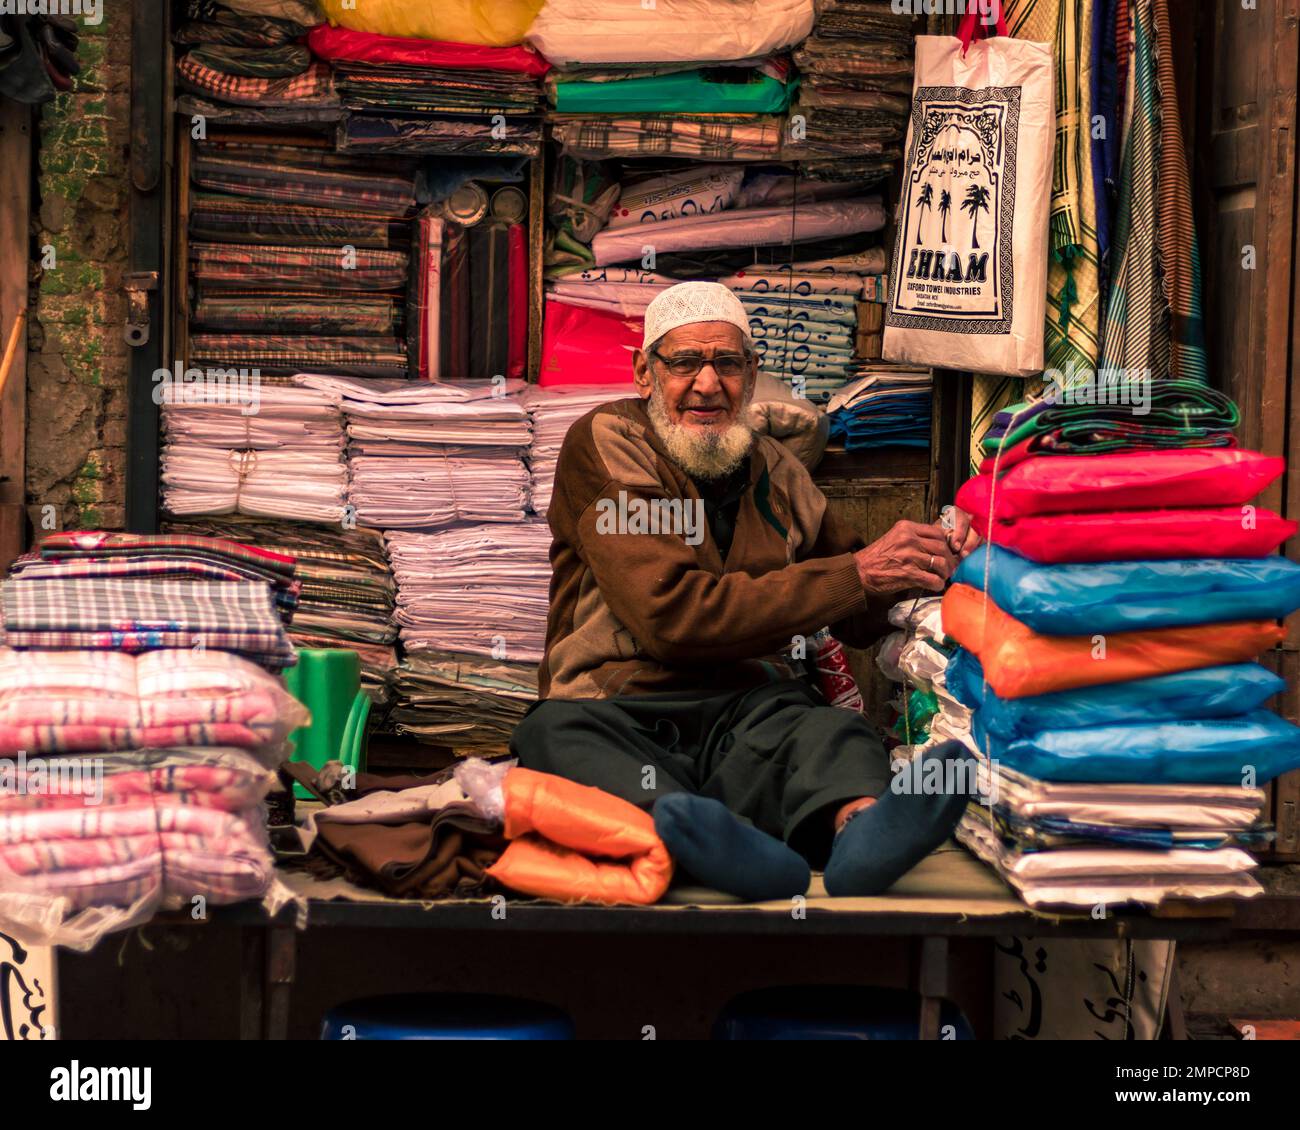 https://c8.alamy.com/comp/2MPCP8D/lahore-pakistan-2020-an-old-man-selling-cloths-in-his-small-cloth-shop-in-the-walled-city-of-lahore-old-man-smiling-and-looking-into-the-camera-2MPCP8D.jpg